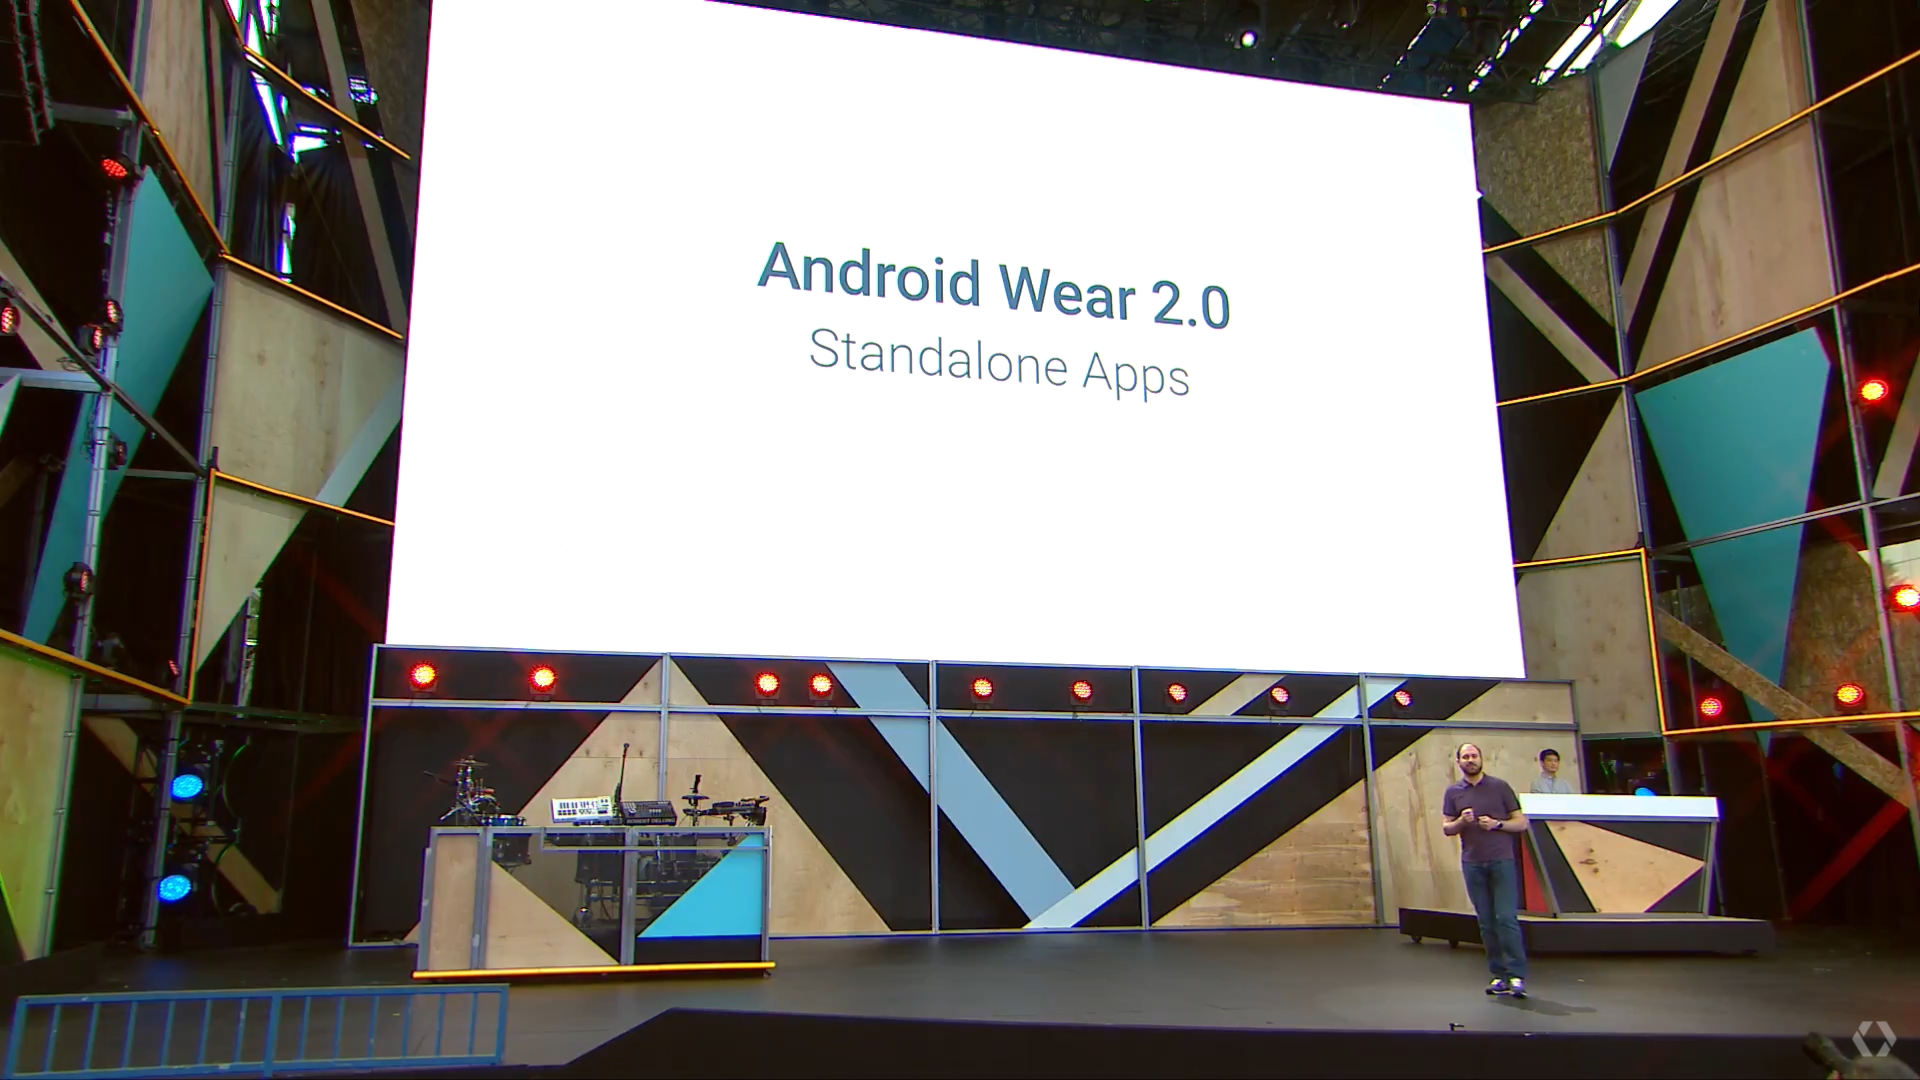 Big screen showing Android Wear 2.0 Standalone Apps